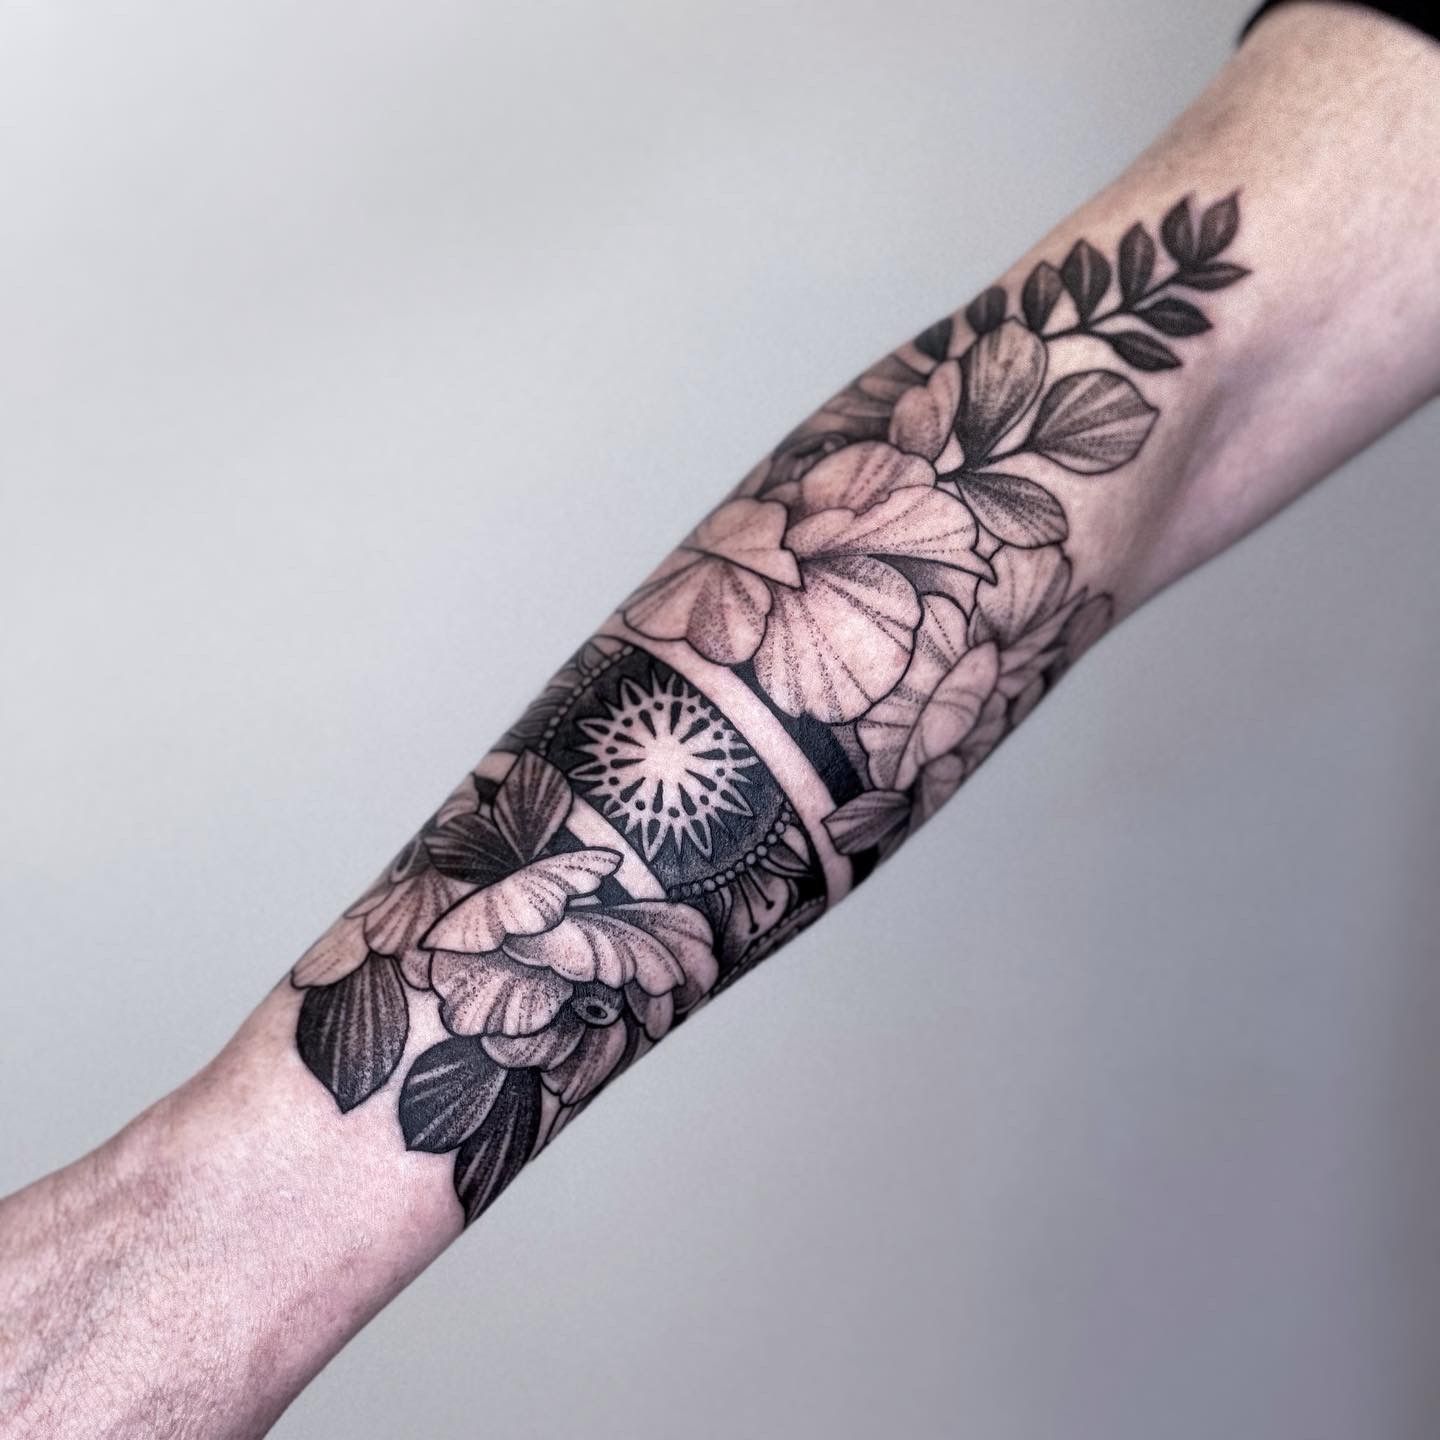 Ink Your Love With These Creative Couple Tattoos - KickAss Things | Henna  tattoo designs, Henna tattoo designs simple, Small mandala tattoo